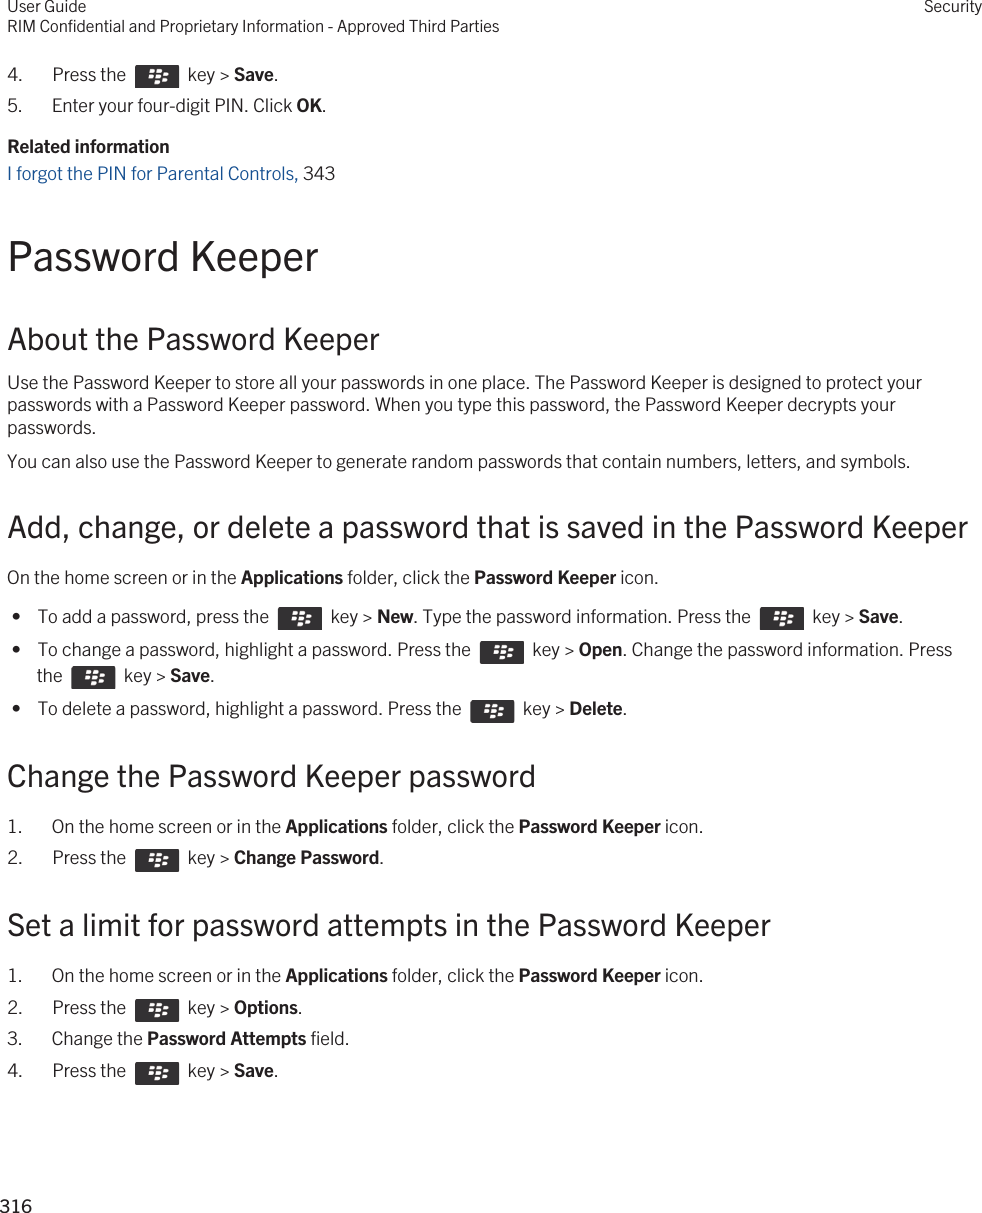 4.  Press the    key &gt; Save. 5. Enter your four-digit PIN. Click OK.Related informationI forgot the PIN for Parental Controls, 343Password KeeperAbout the Password KeeperUse the Password Keeper to store all your passwords in one place. The Password Keeper is designed to protect your passwords with a Password Keeper password. When you type this password, the Password Keeper decrypts your passwords.You can also use the Password Keeper to generate random passwords that contain numbers, letters, and symbols.Add, change, or delete a password that is saved in the Password KeeperOn the home screen or in the Applications folder, click the Password Keeper icon. •  To add a password, press the    key &gt; New. Type the password information. Press the    key &gt; Save. •  To change a password, highlight a password. Press the    key &gt; Open. Change the password information. Press the    key &gt; Save. •  To delete a password, highlight a password. Press the    key &gt; Delete.Change the Password Keeper password1. On the home screen or in the Applications folder, click the Password Keeper icon.2.  Press the    key &gt; Change Password. Set a limit for password attempts in the Password Keeper1. On the home screen or in the Applications folder, click the Password Keeper icon.2.  Press the    key &gt; Options. 3. Change the Password Attempts field.4.  Press the    key &gt; Save. User GuideRIM Confidential and Proprietary Information - Approved Third PartiesSecurity316 